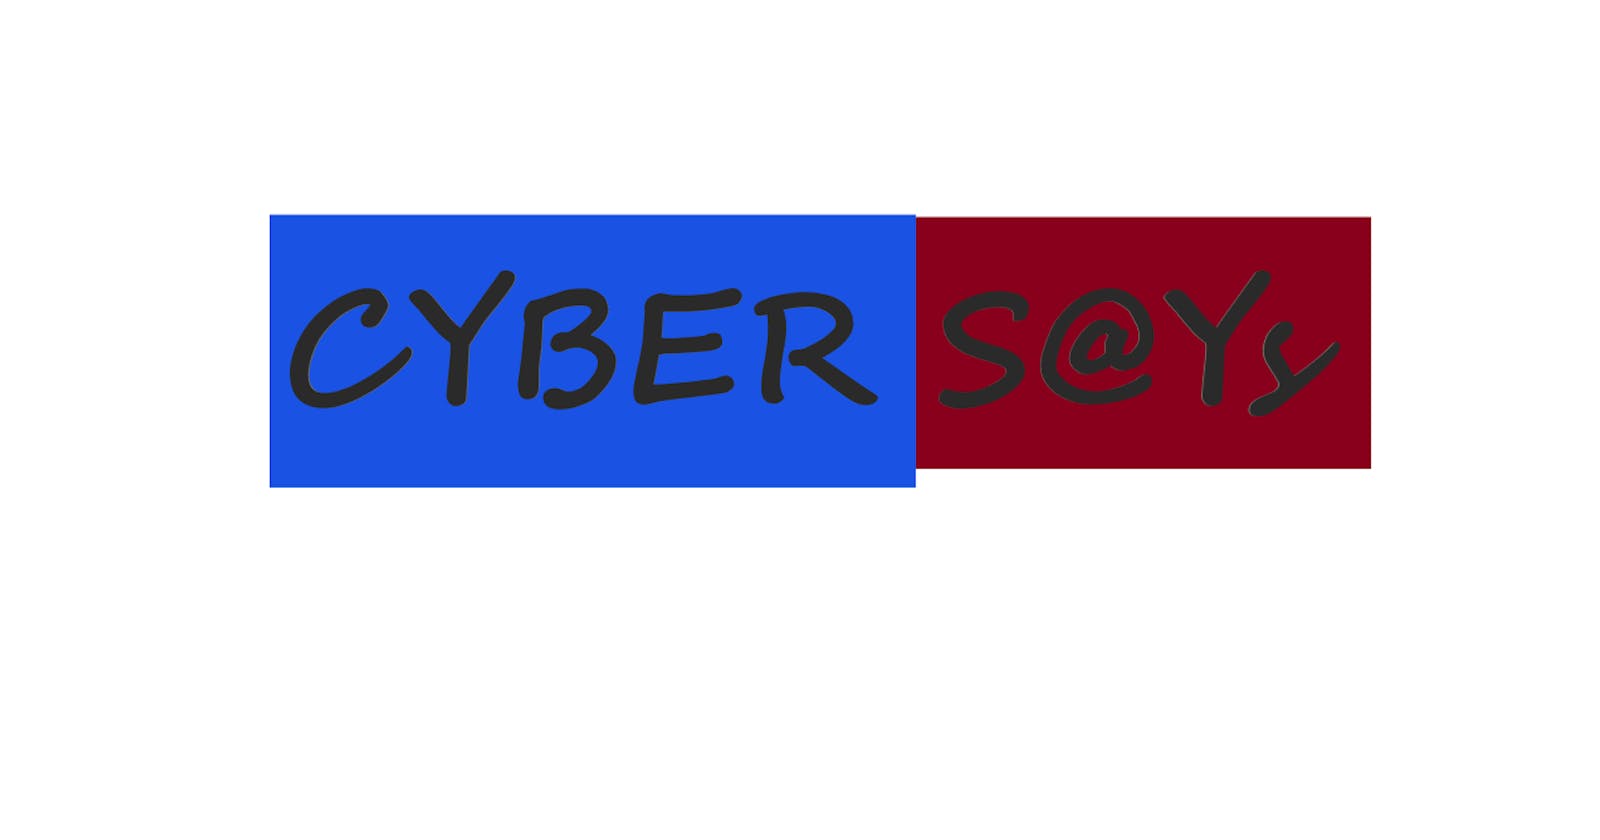 Cyber Dos &Don'ts